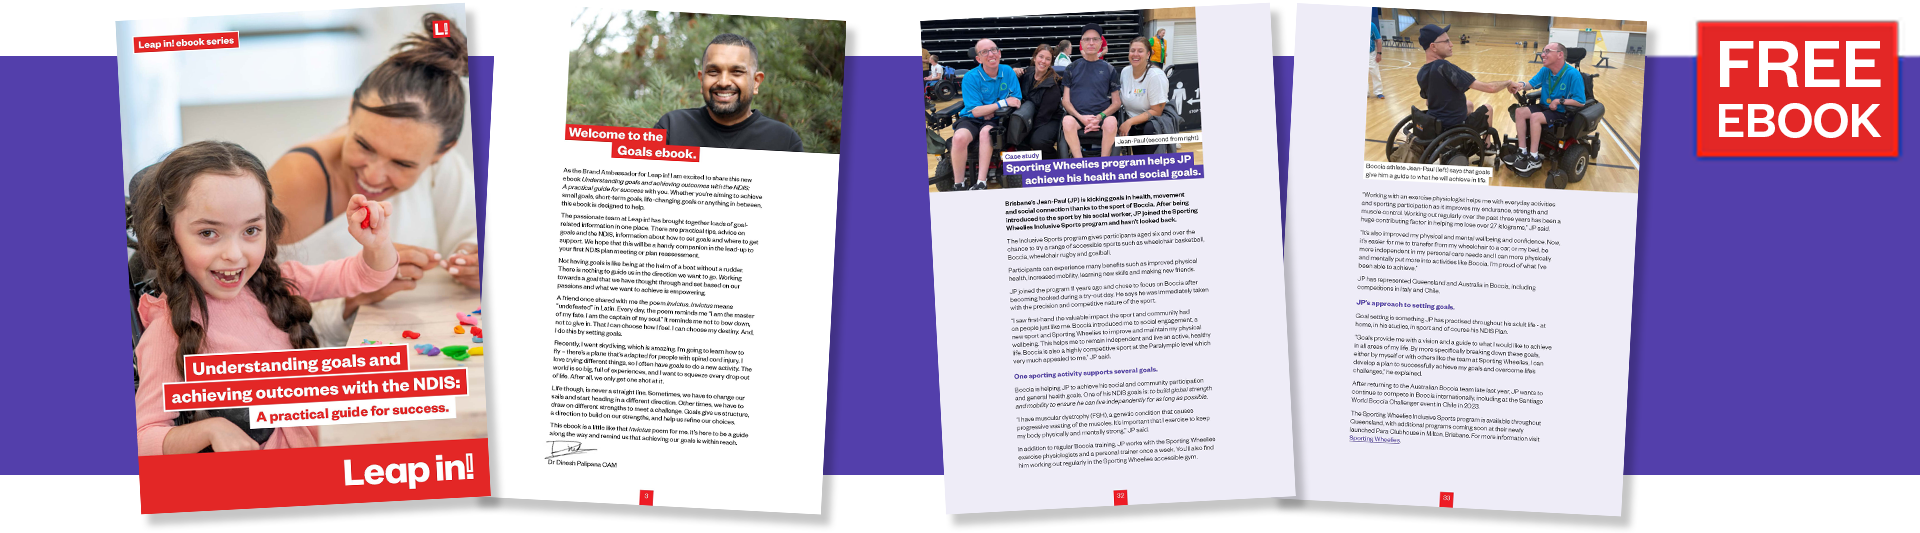 Four pages of the Goals and the NDIS ebook